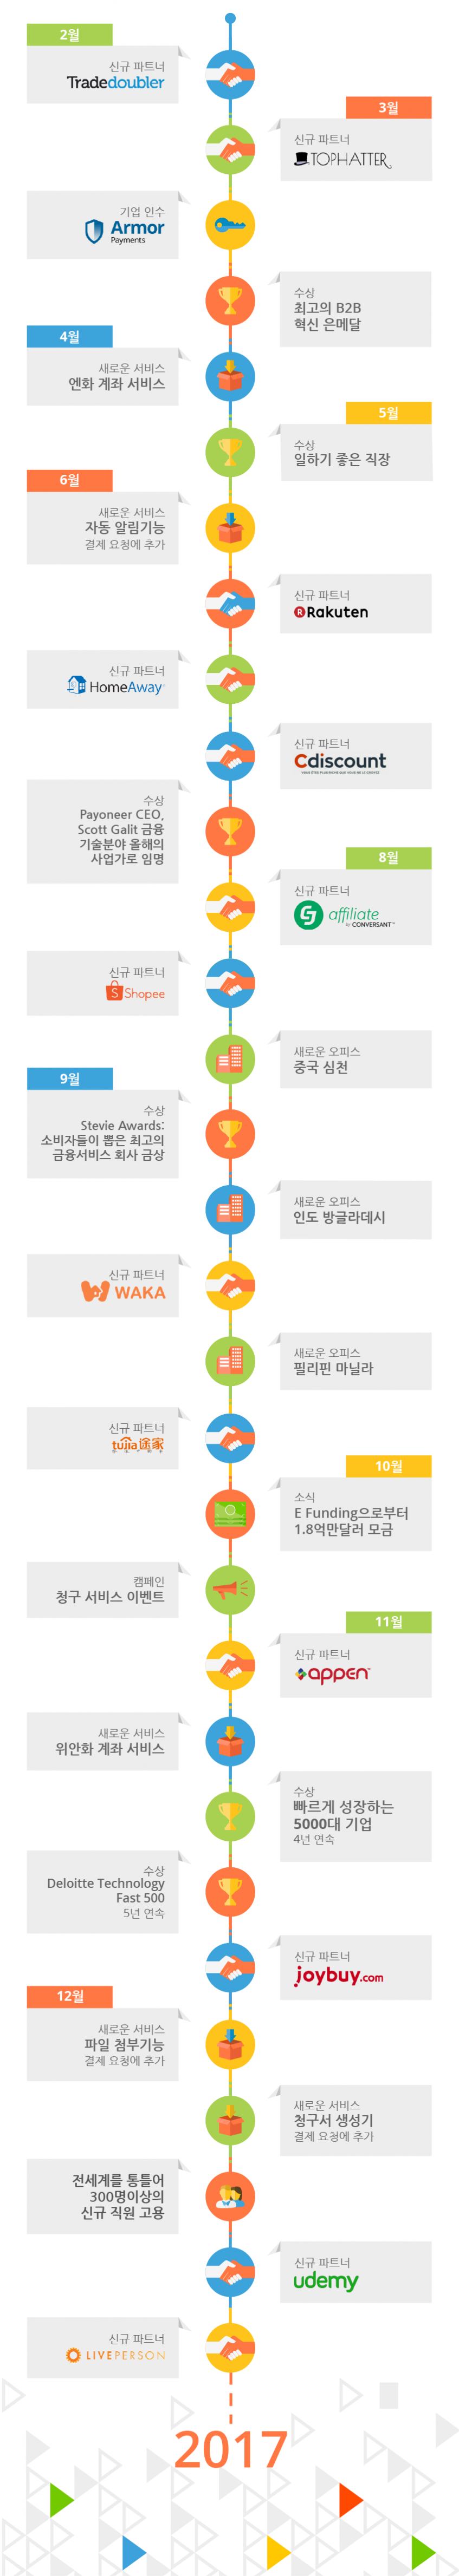 267_infographic_year_2016_kr_2parts-01